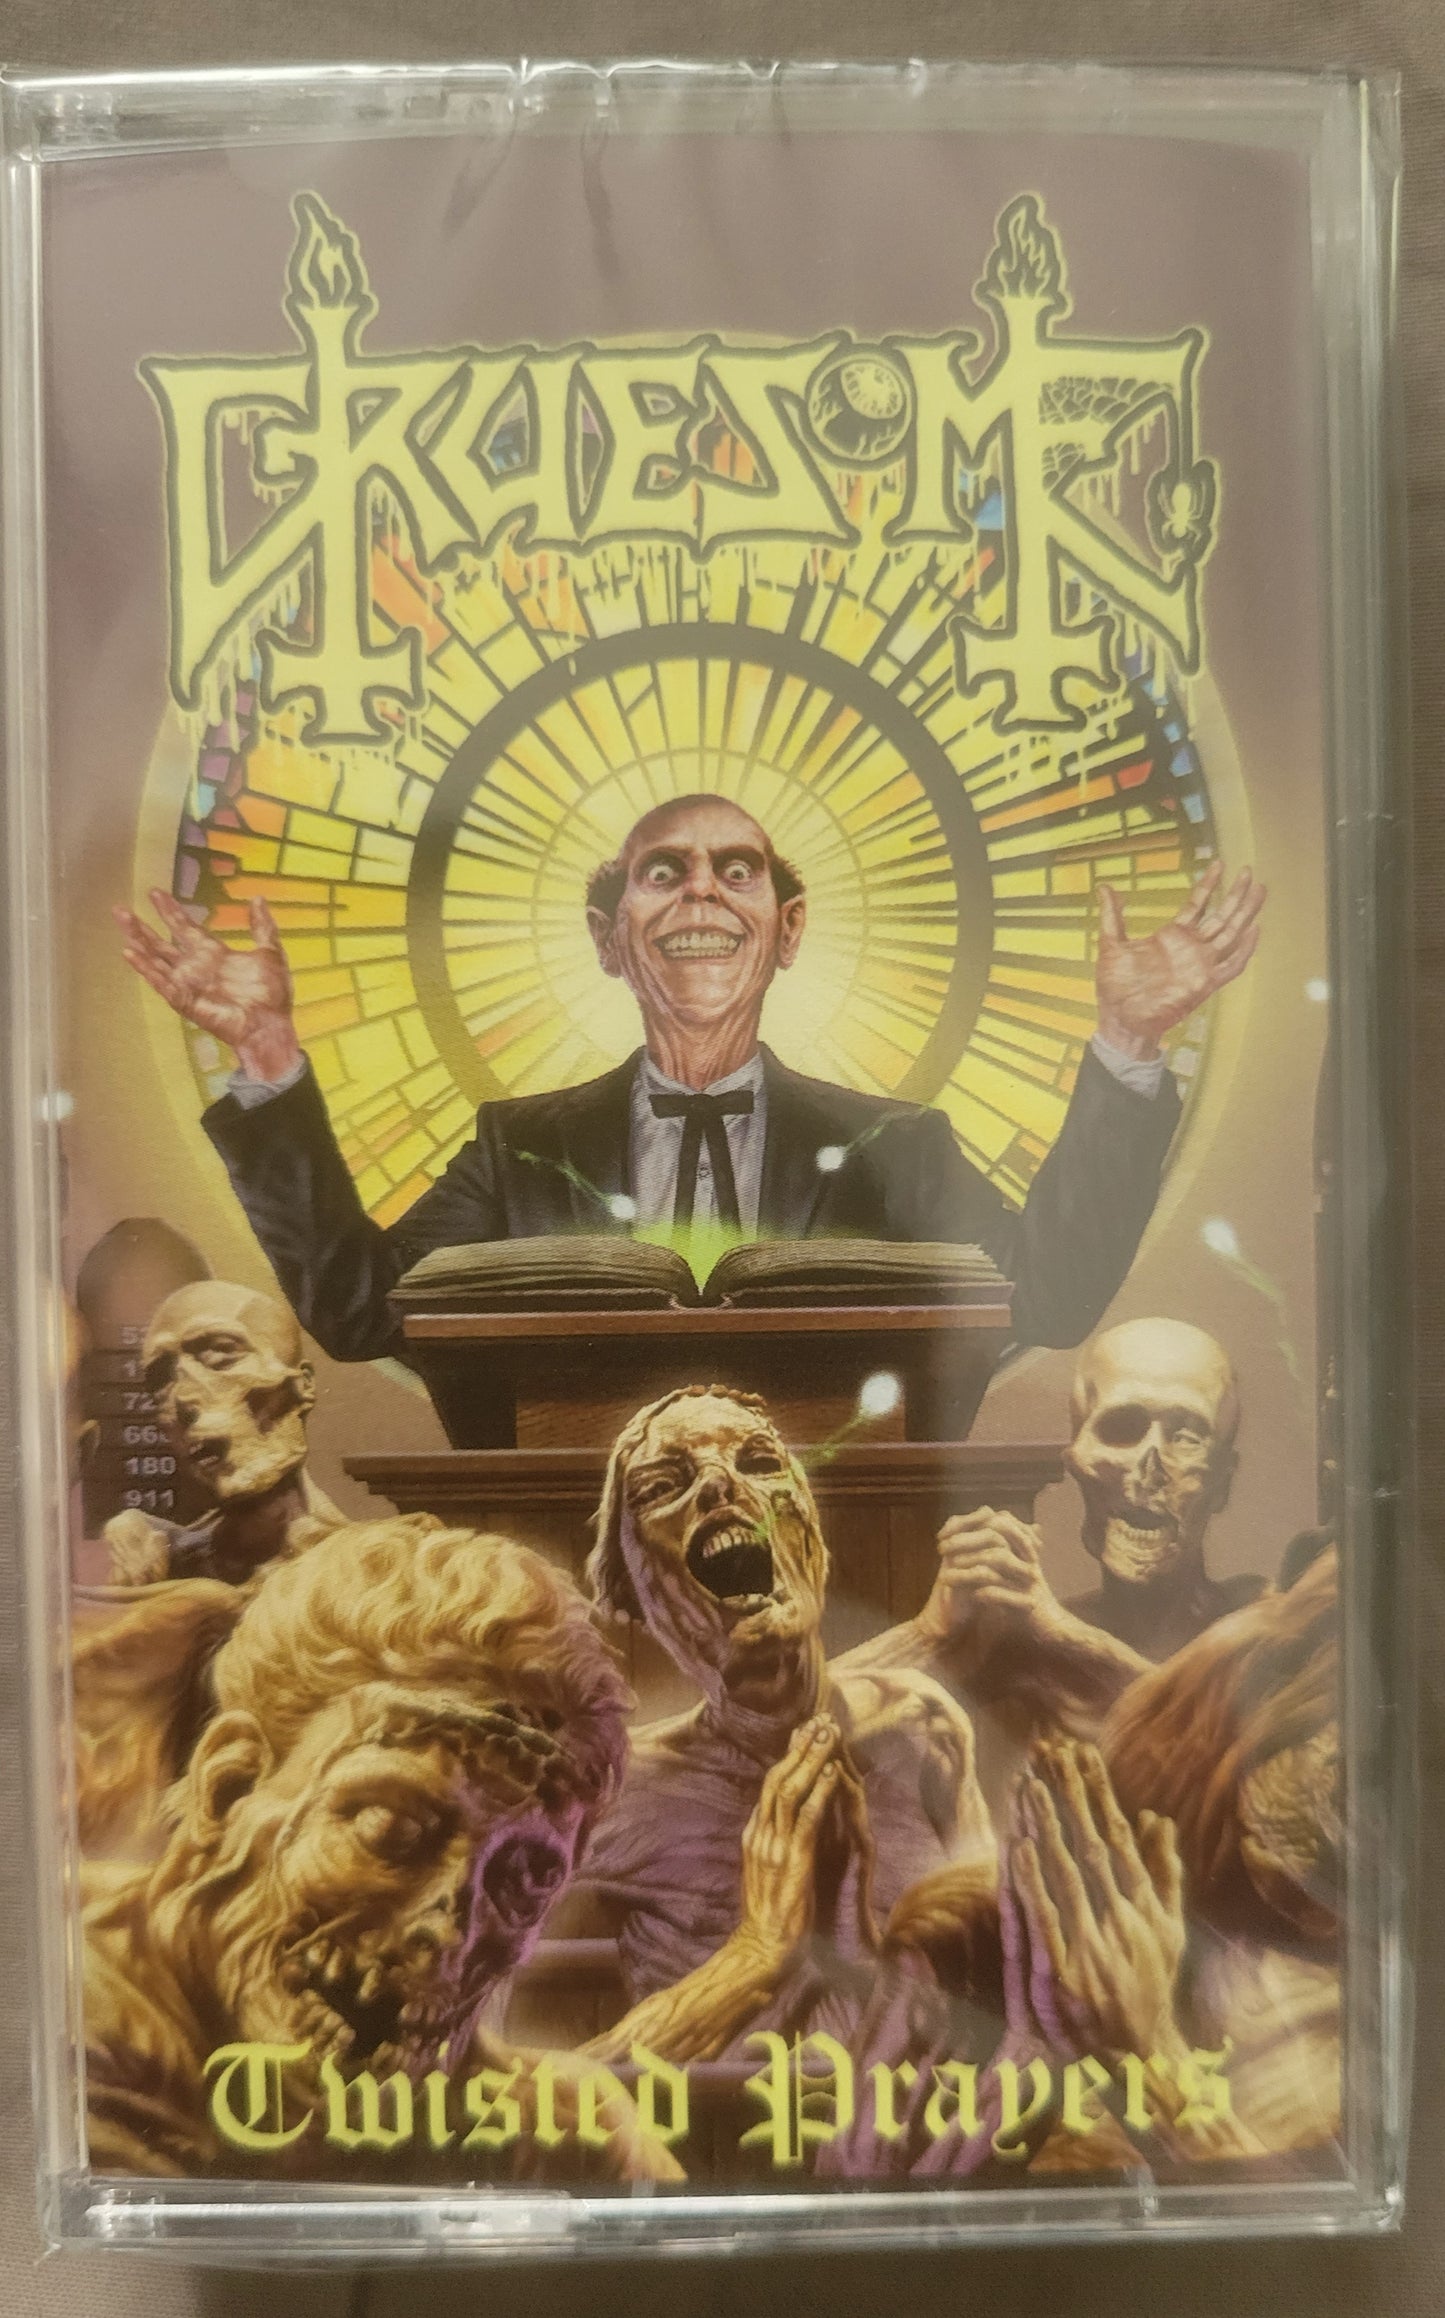 GRUESOME "Twisted Prayers" cassette